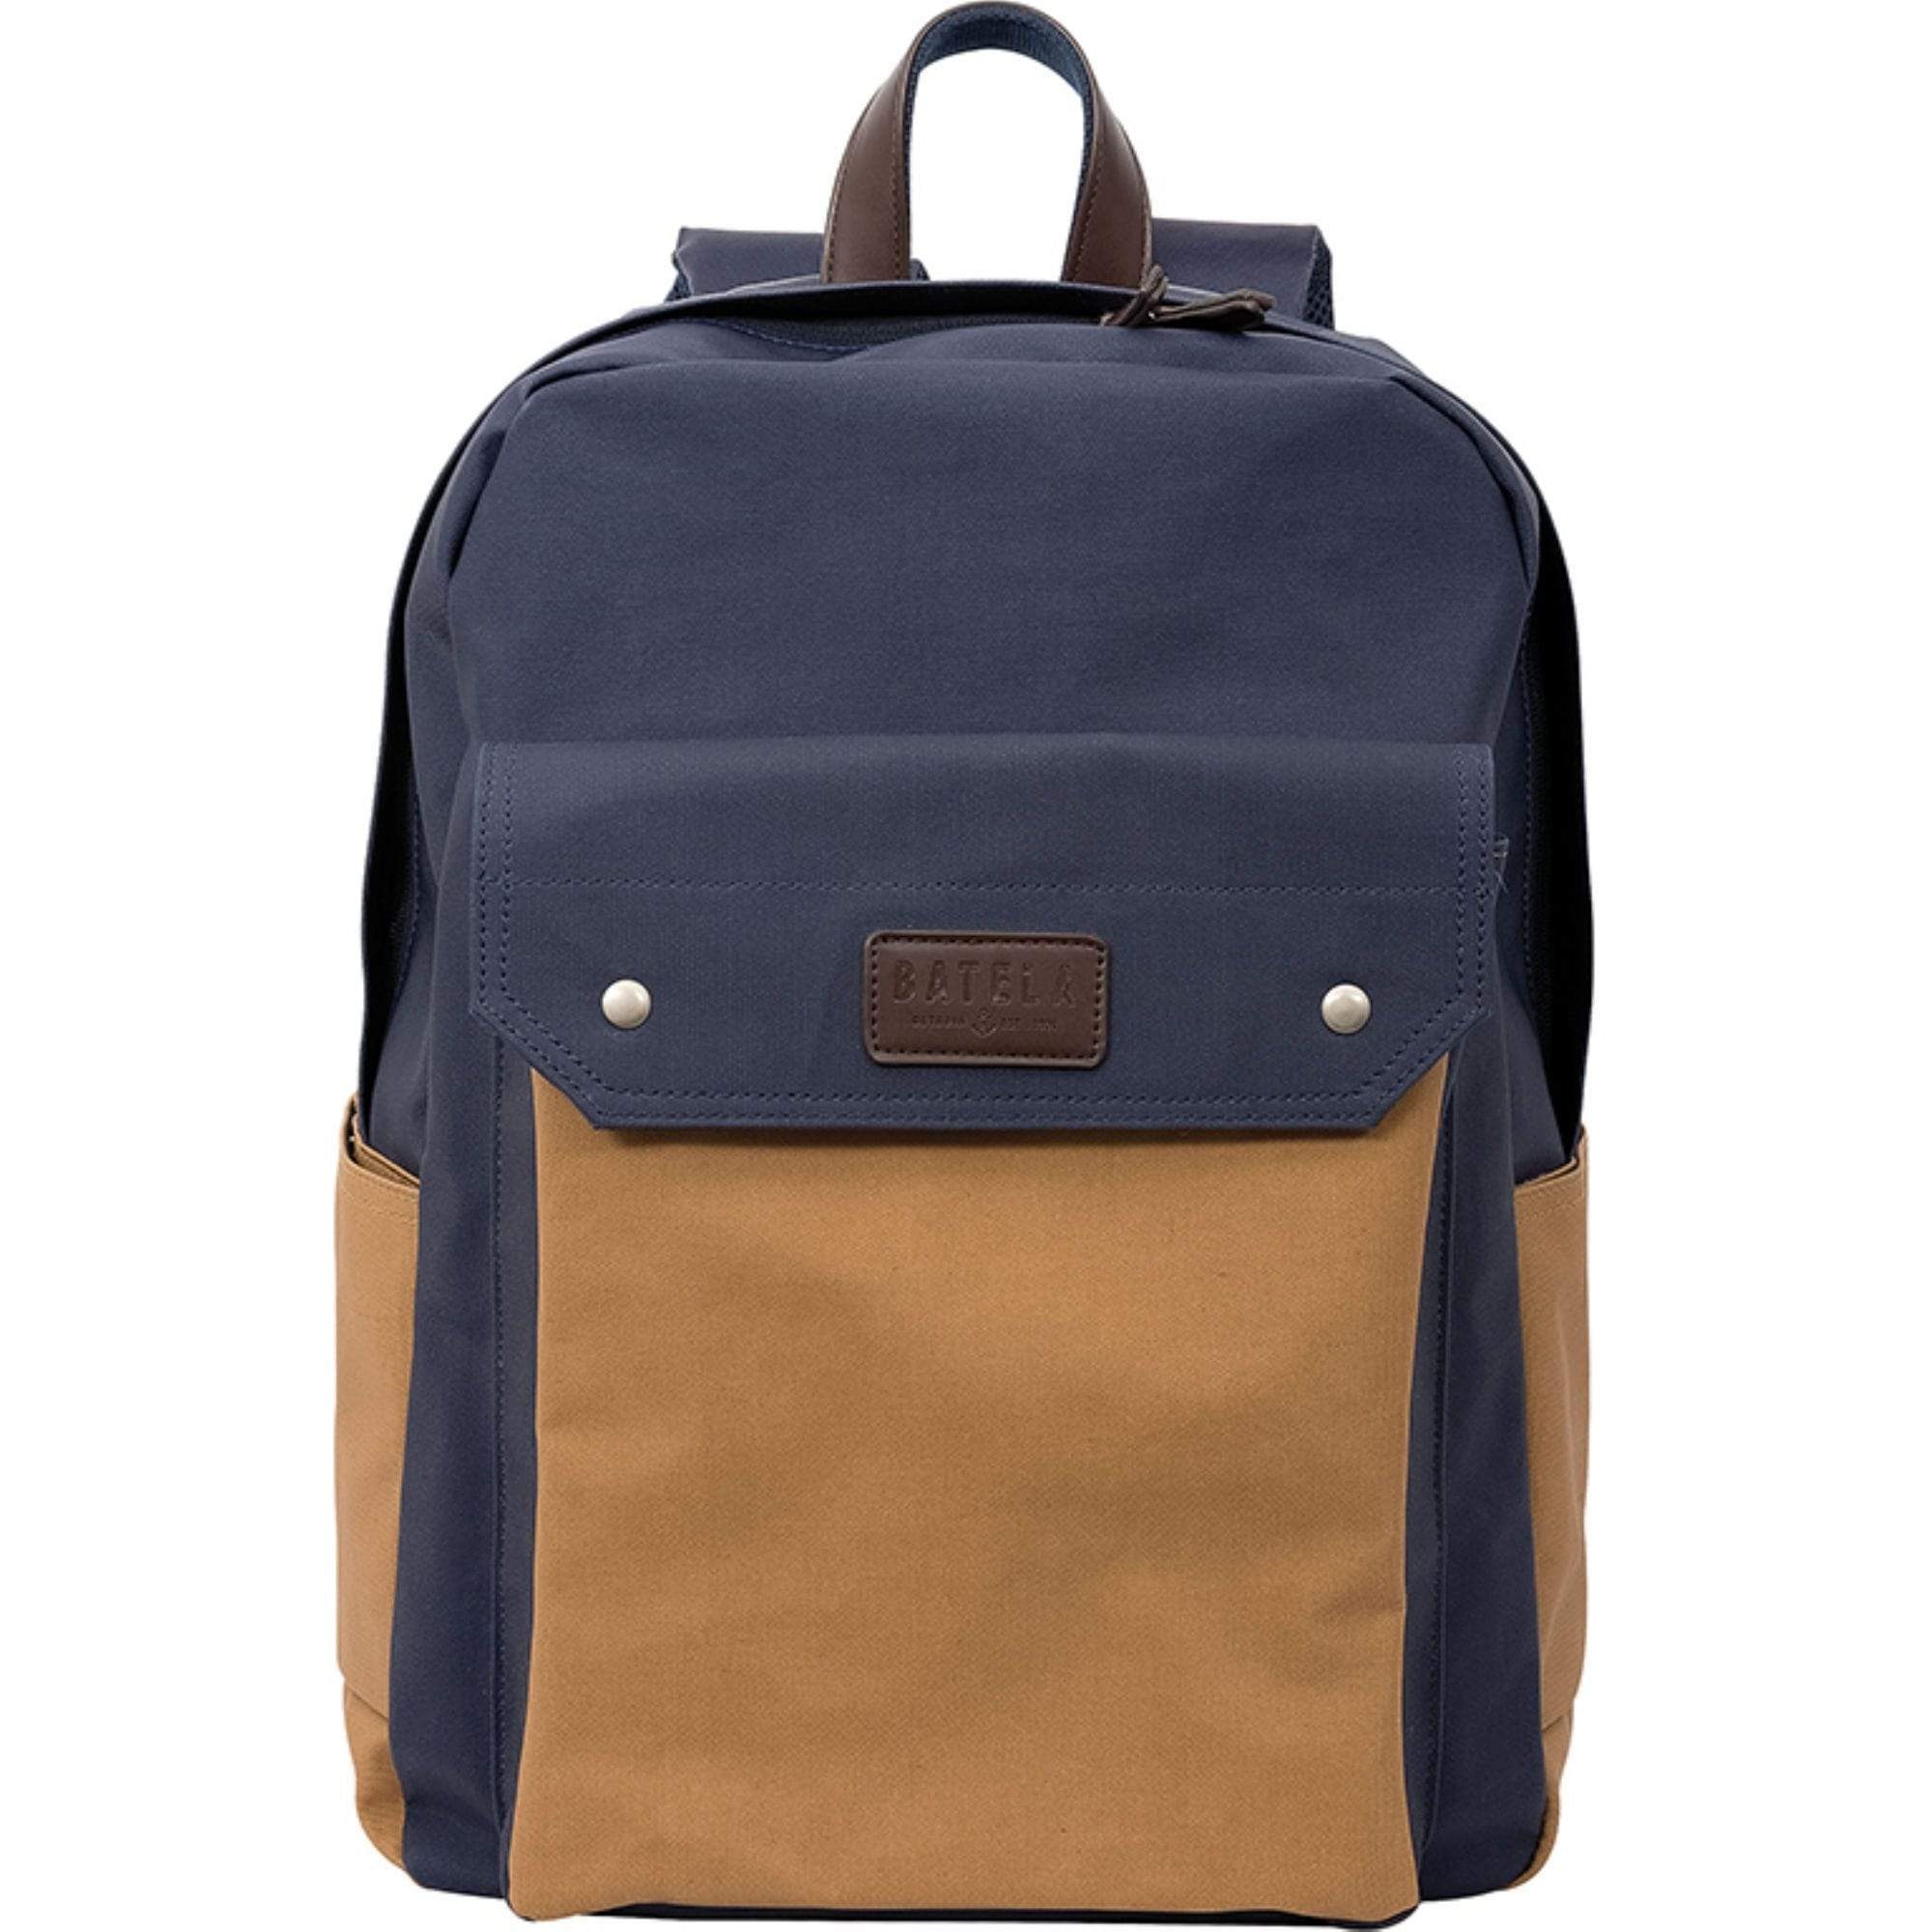 Water-Resistant Backpack in Blue and Tan – Default